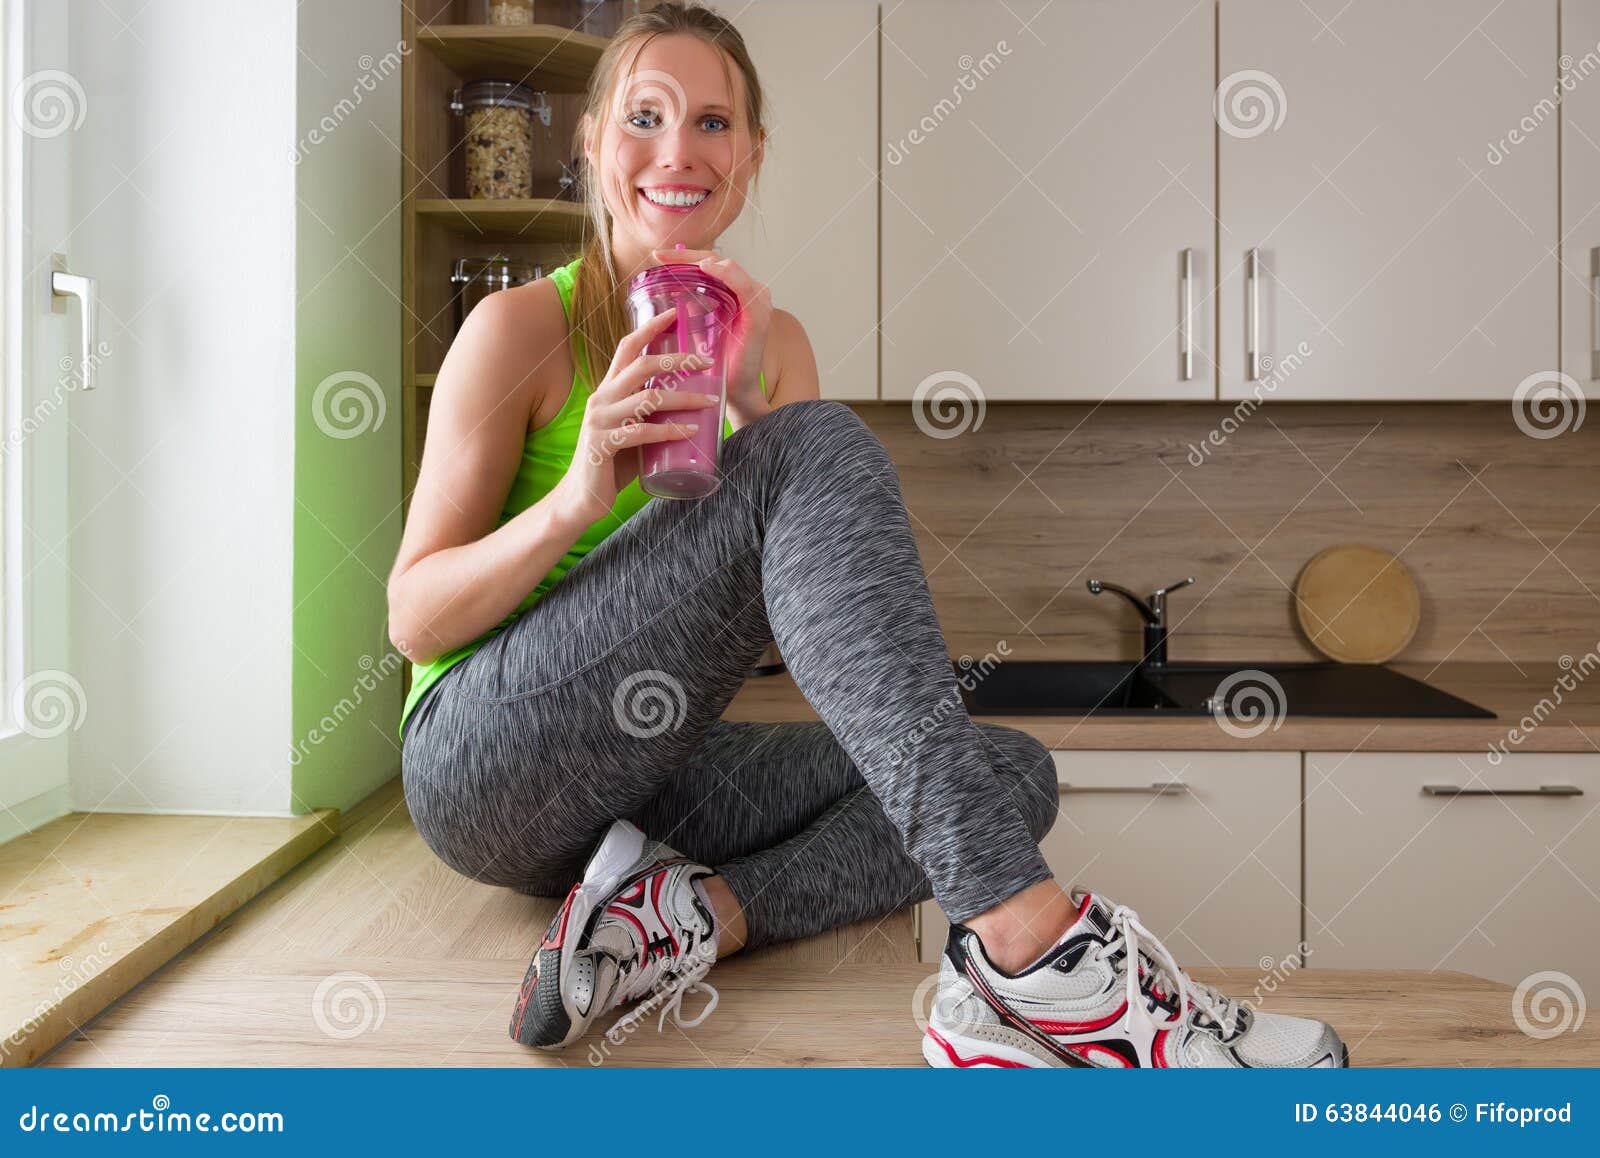 Caucasian Woman In Gym Suit Drinking Protein Shake In The Kitchen Stock